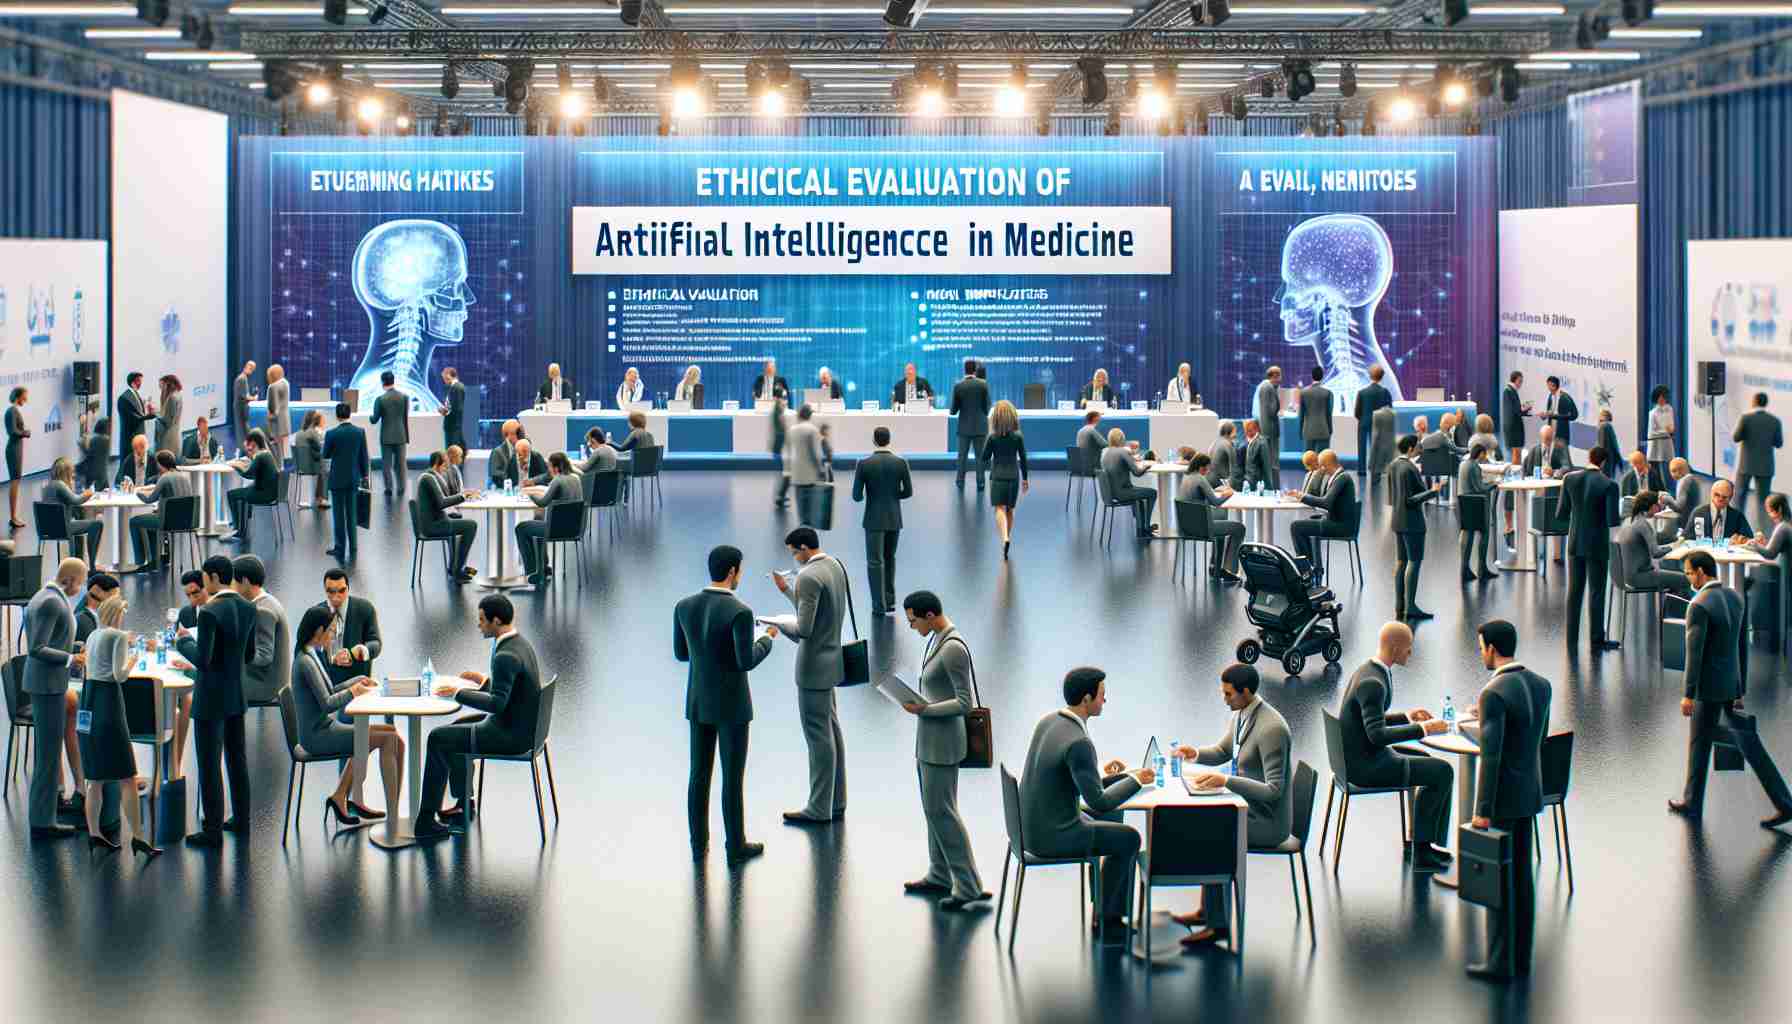 Ethical Evaluation of AI in Medicine Explored at Upcoming Conference